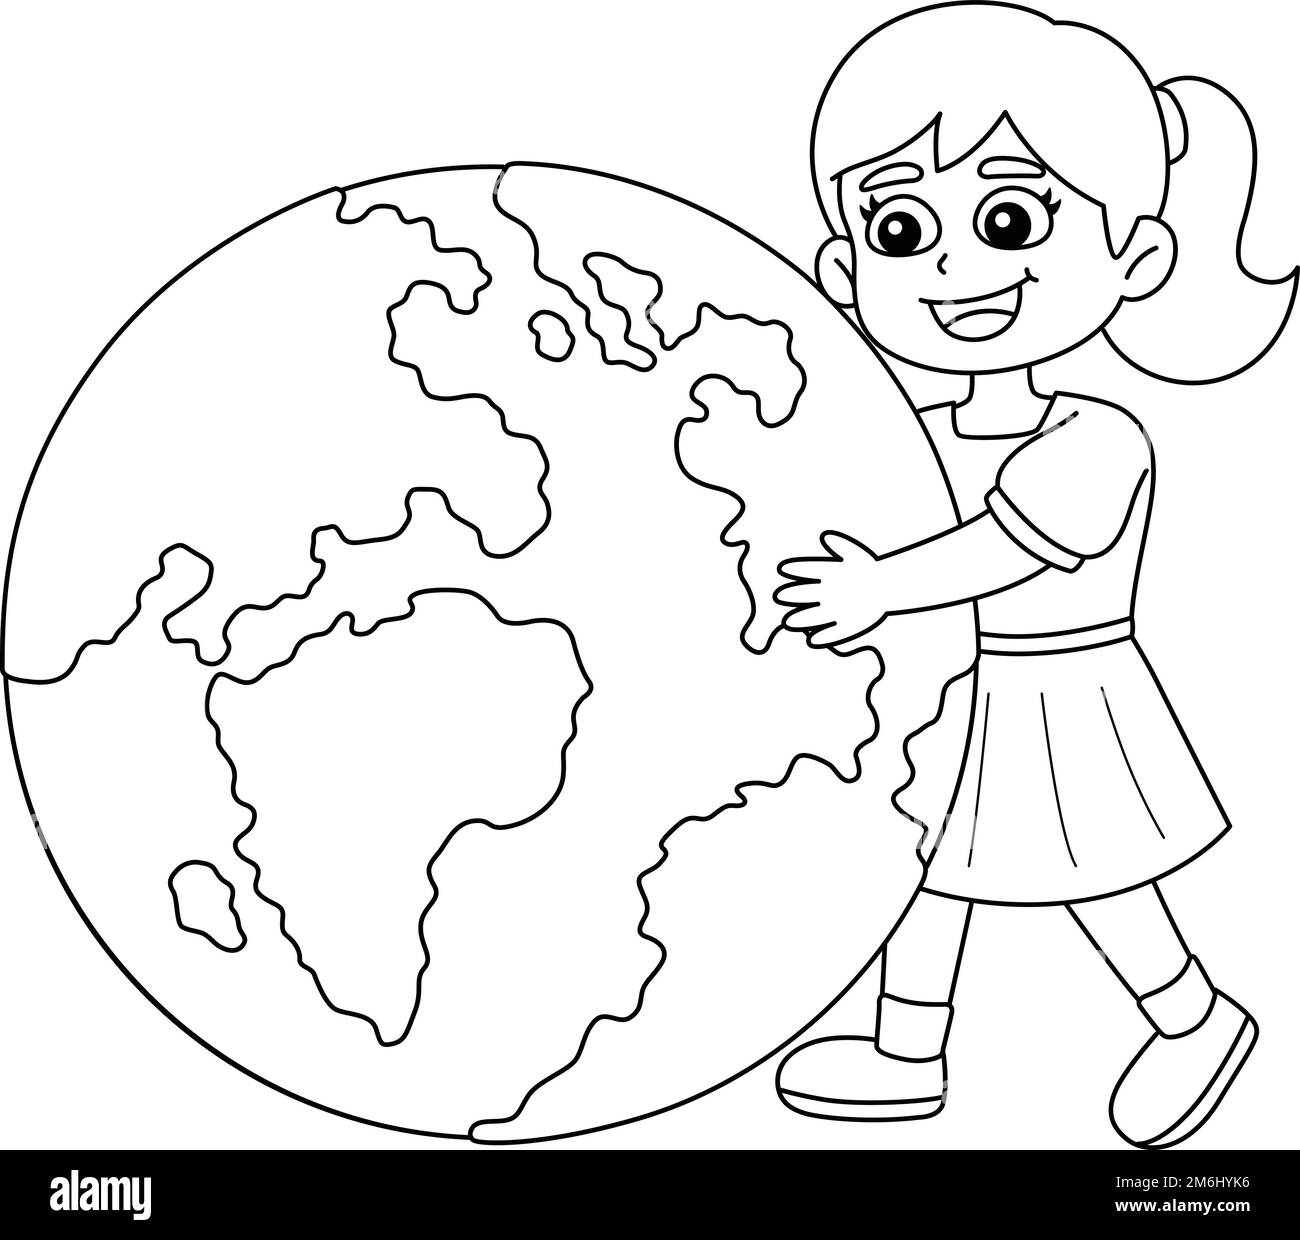 Girl Holding Earth Isolated Coloring Page  Stock Vector